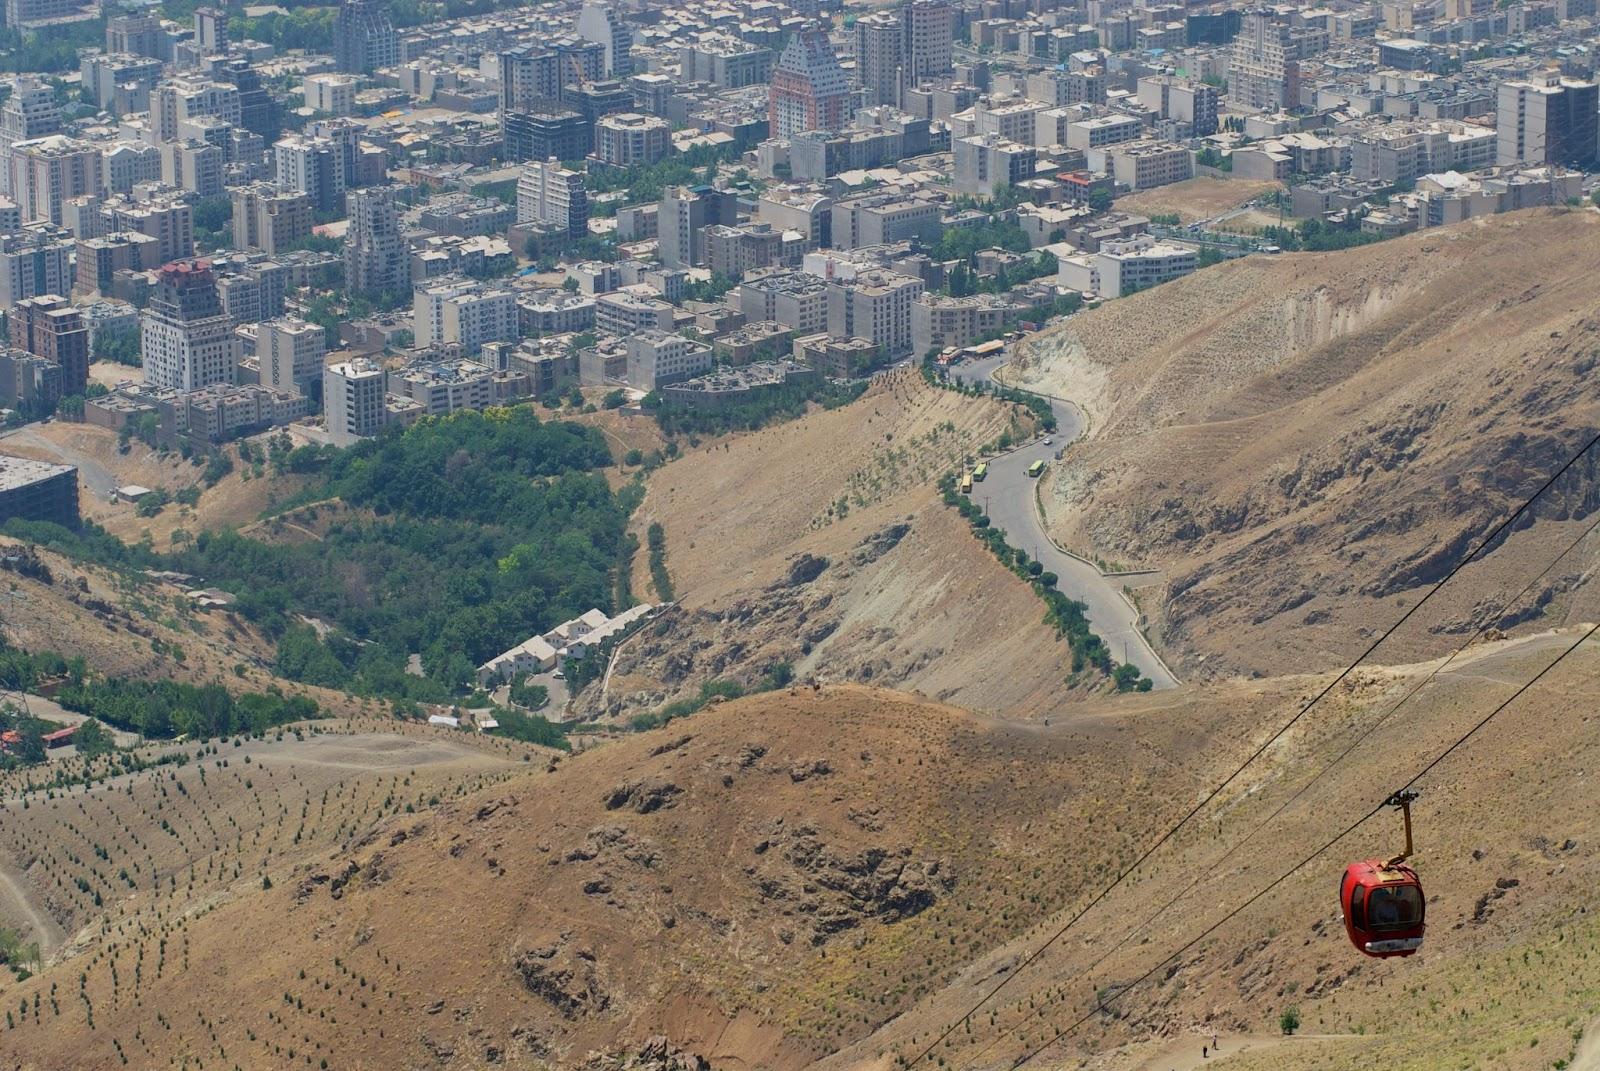 A cable car over a city in Iran